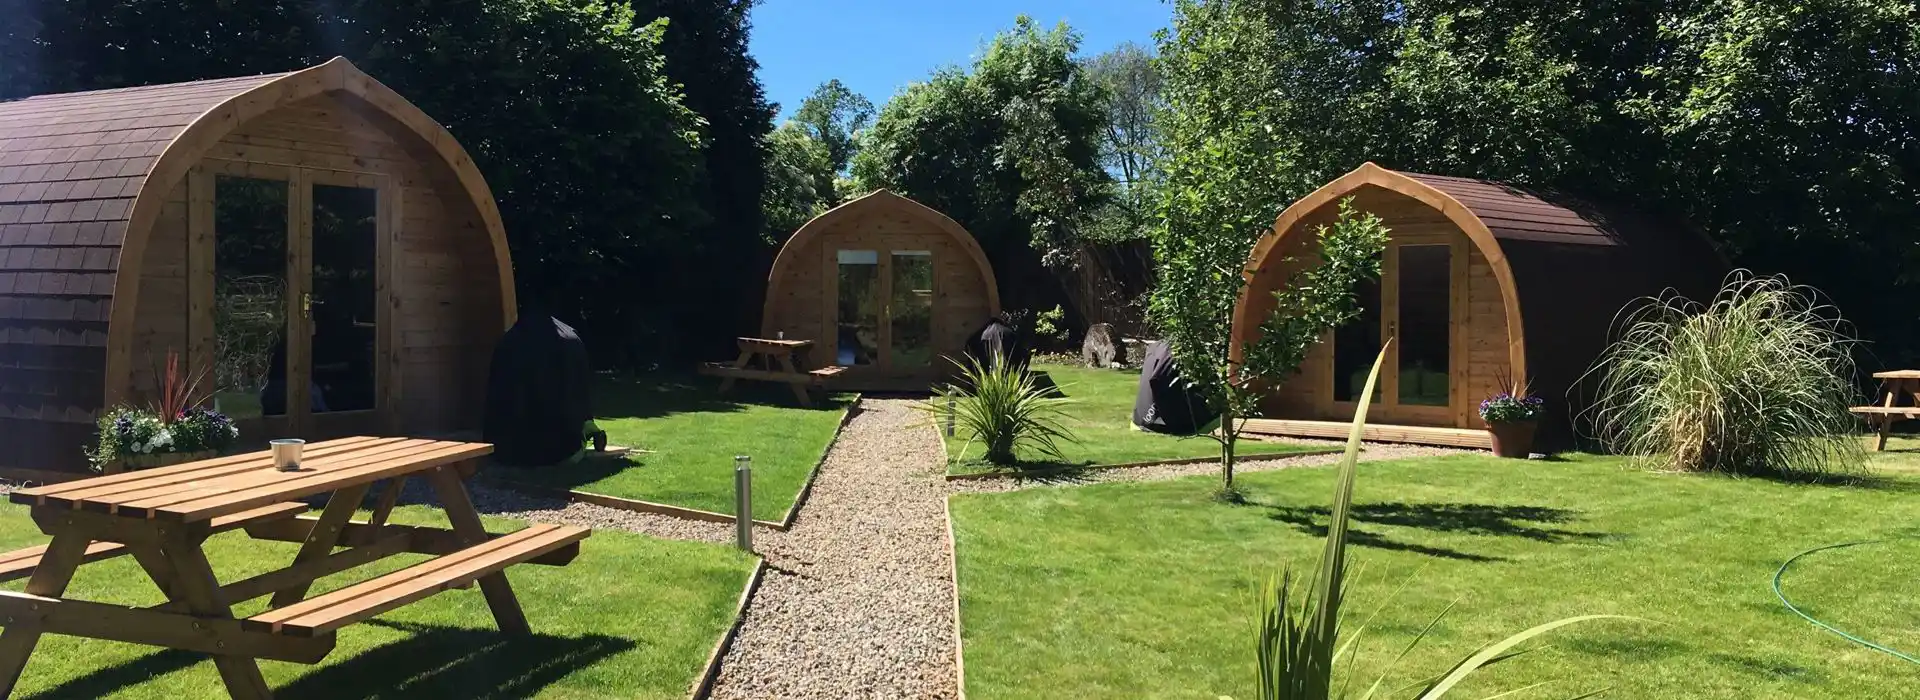 Camping pods in North East